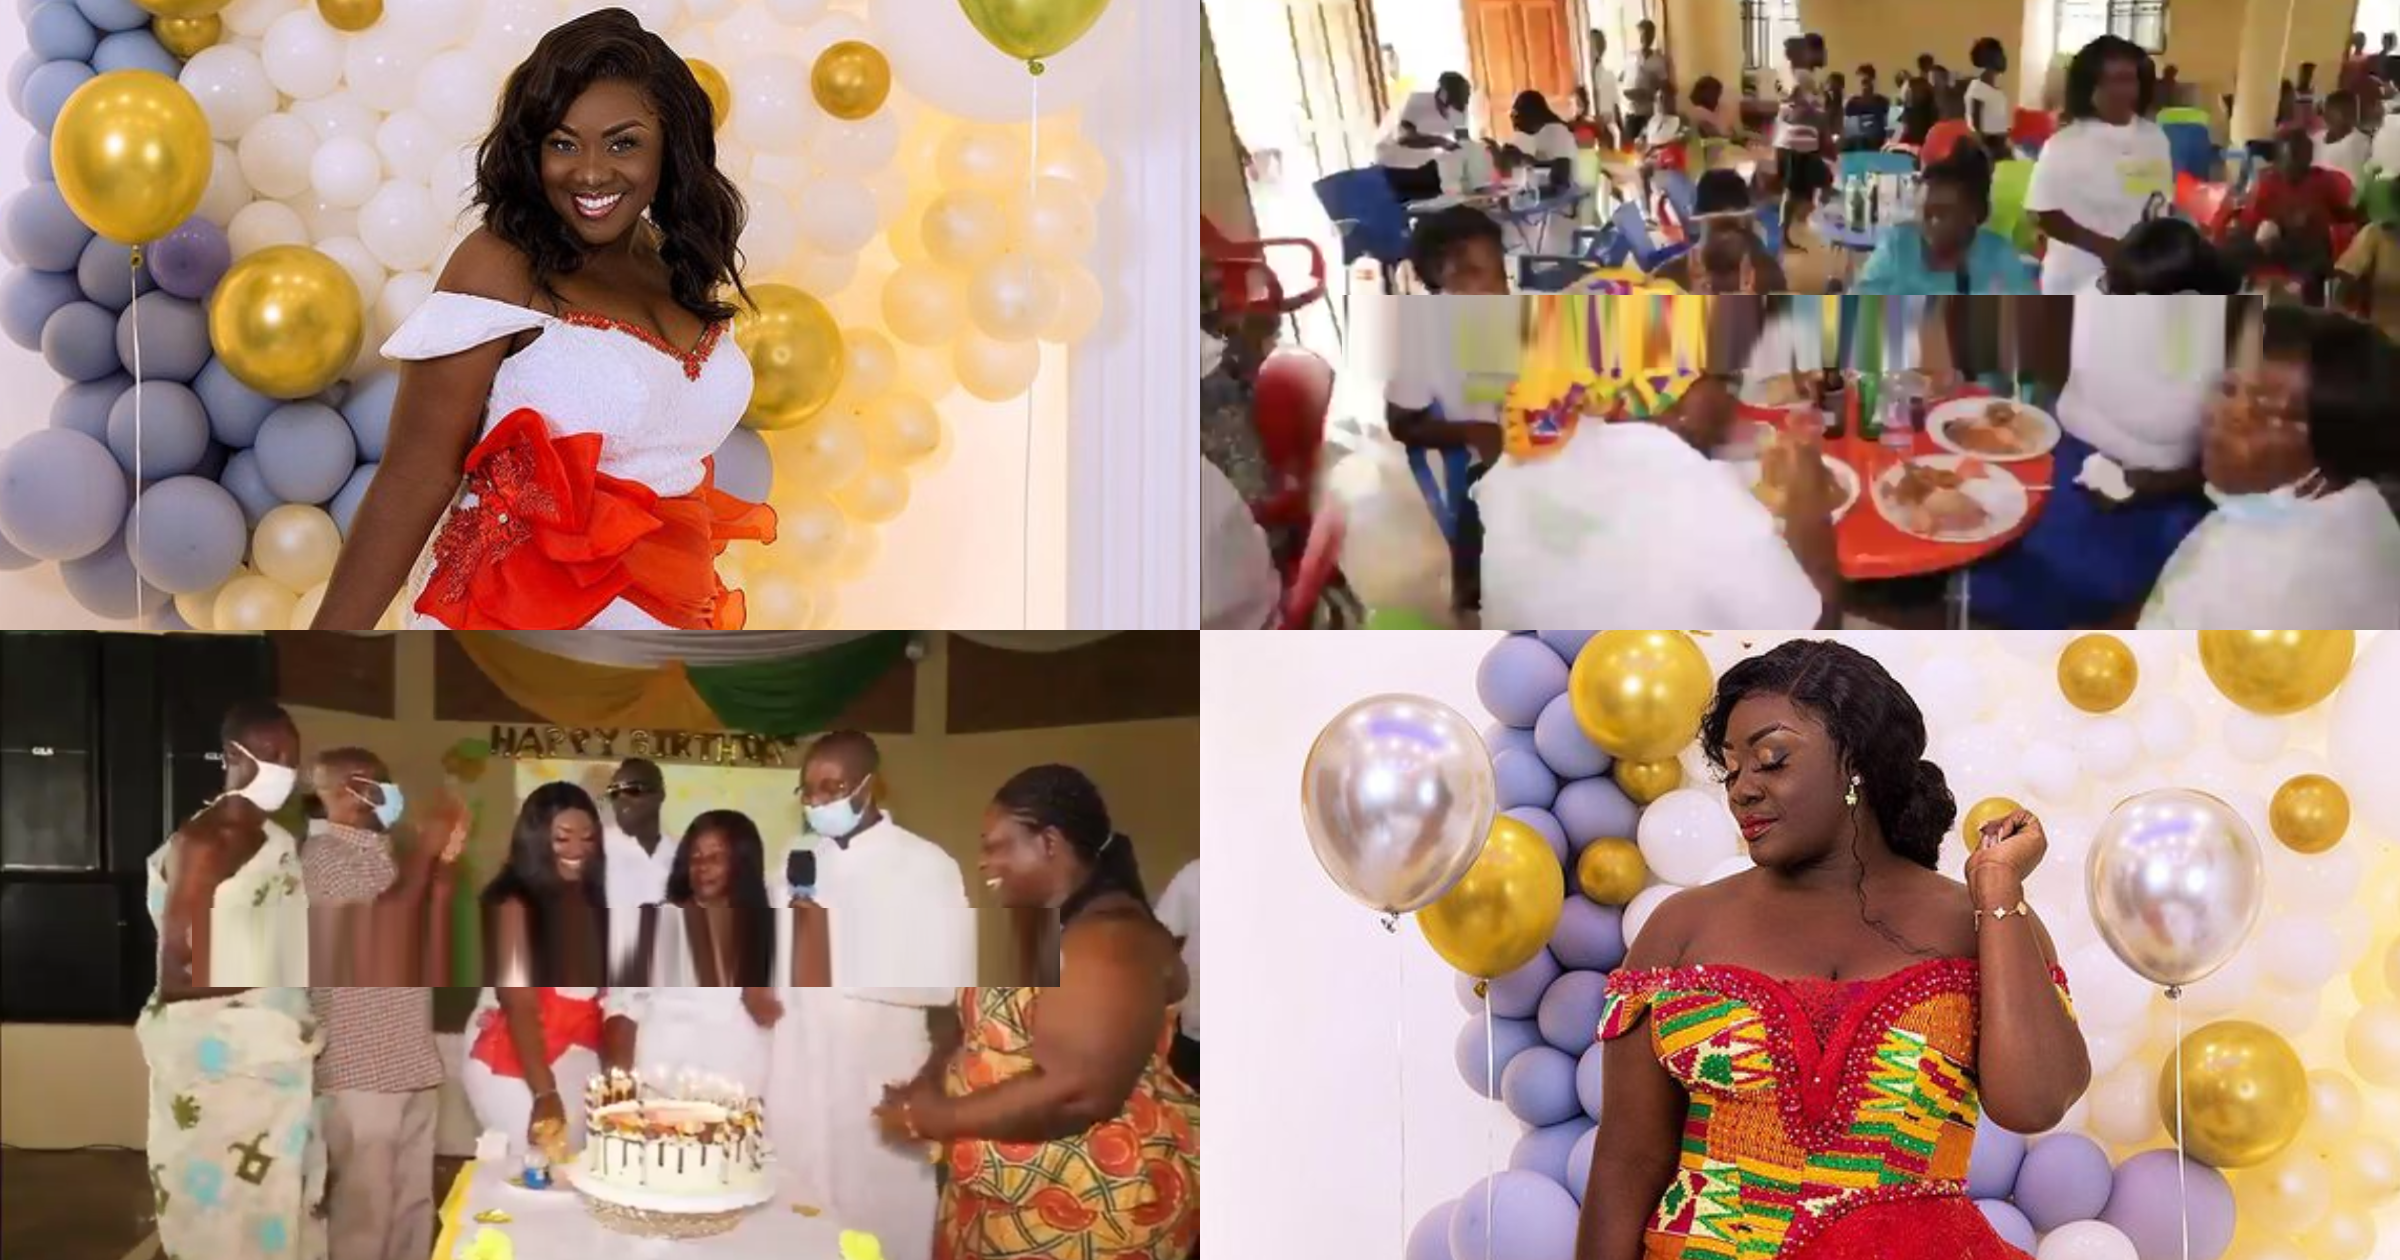 Emelia Brobbey celebrates 39th birthday with widows in her hometown (video)